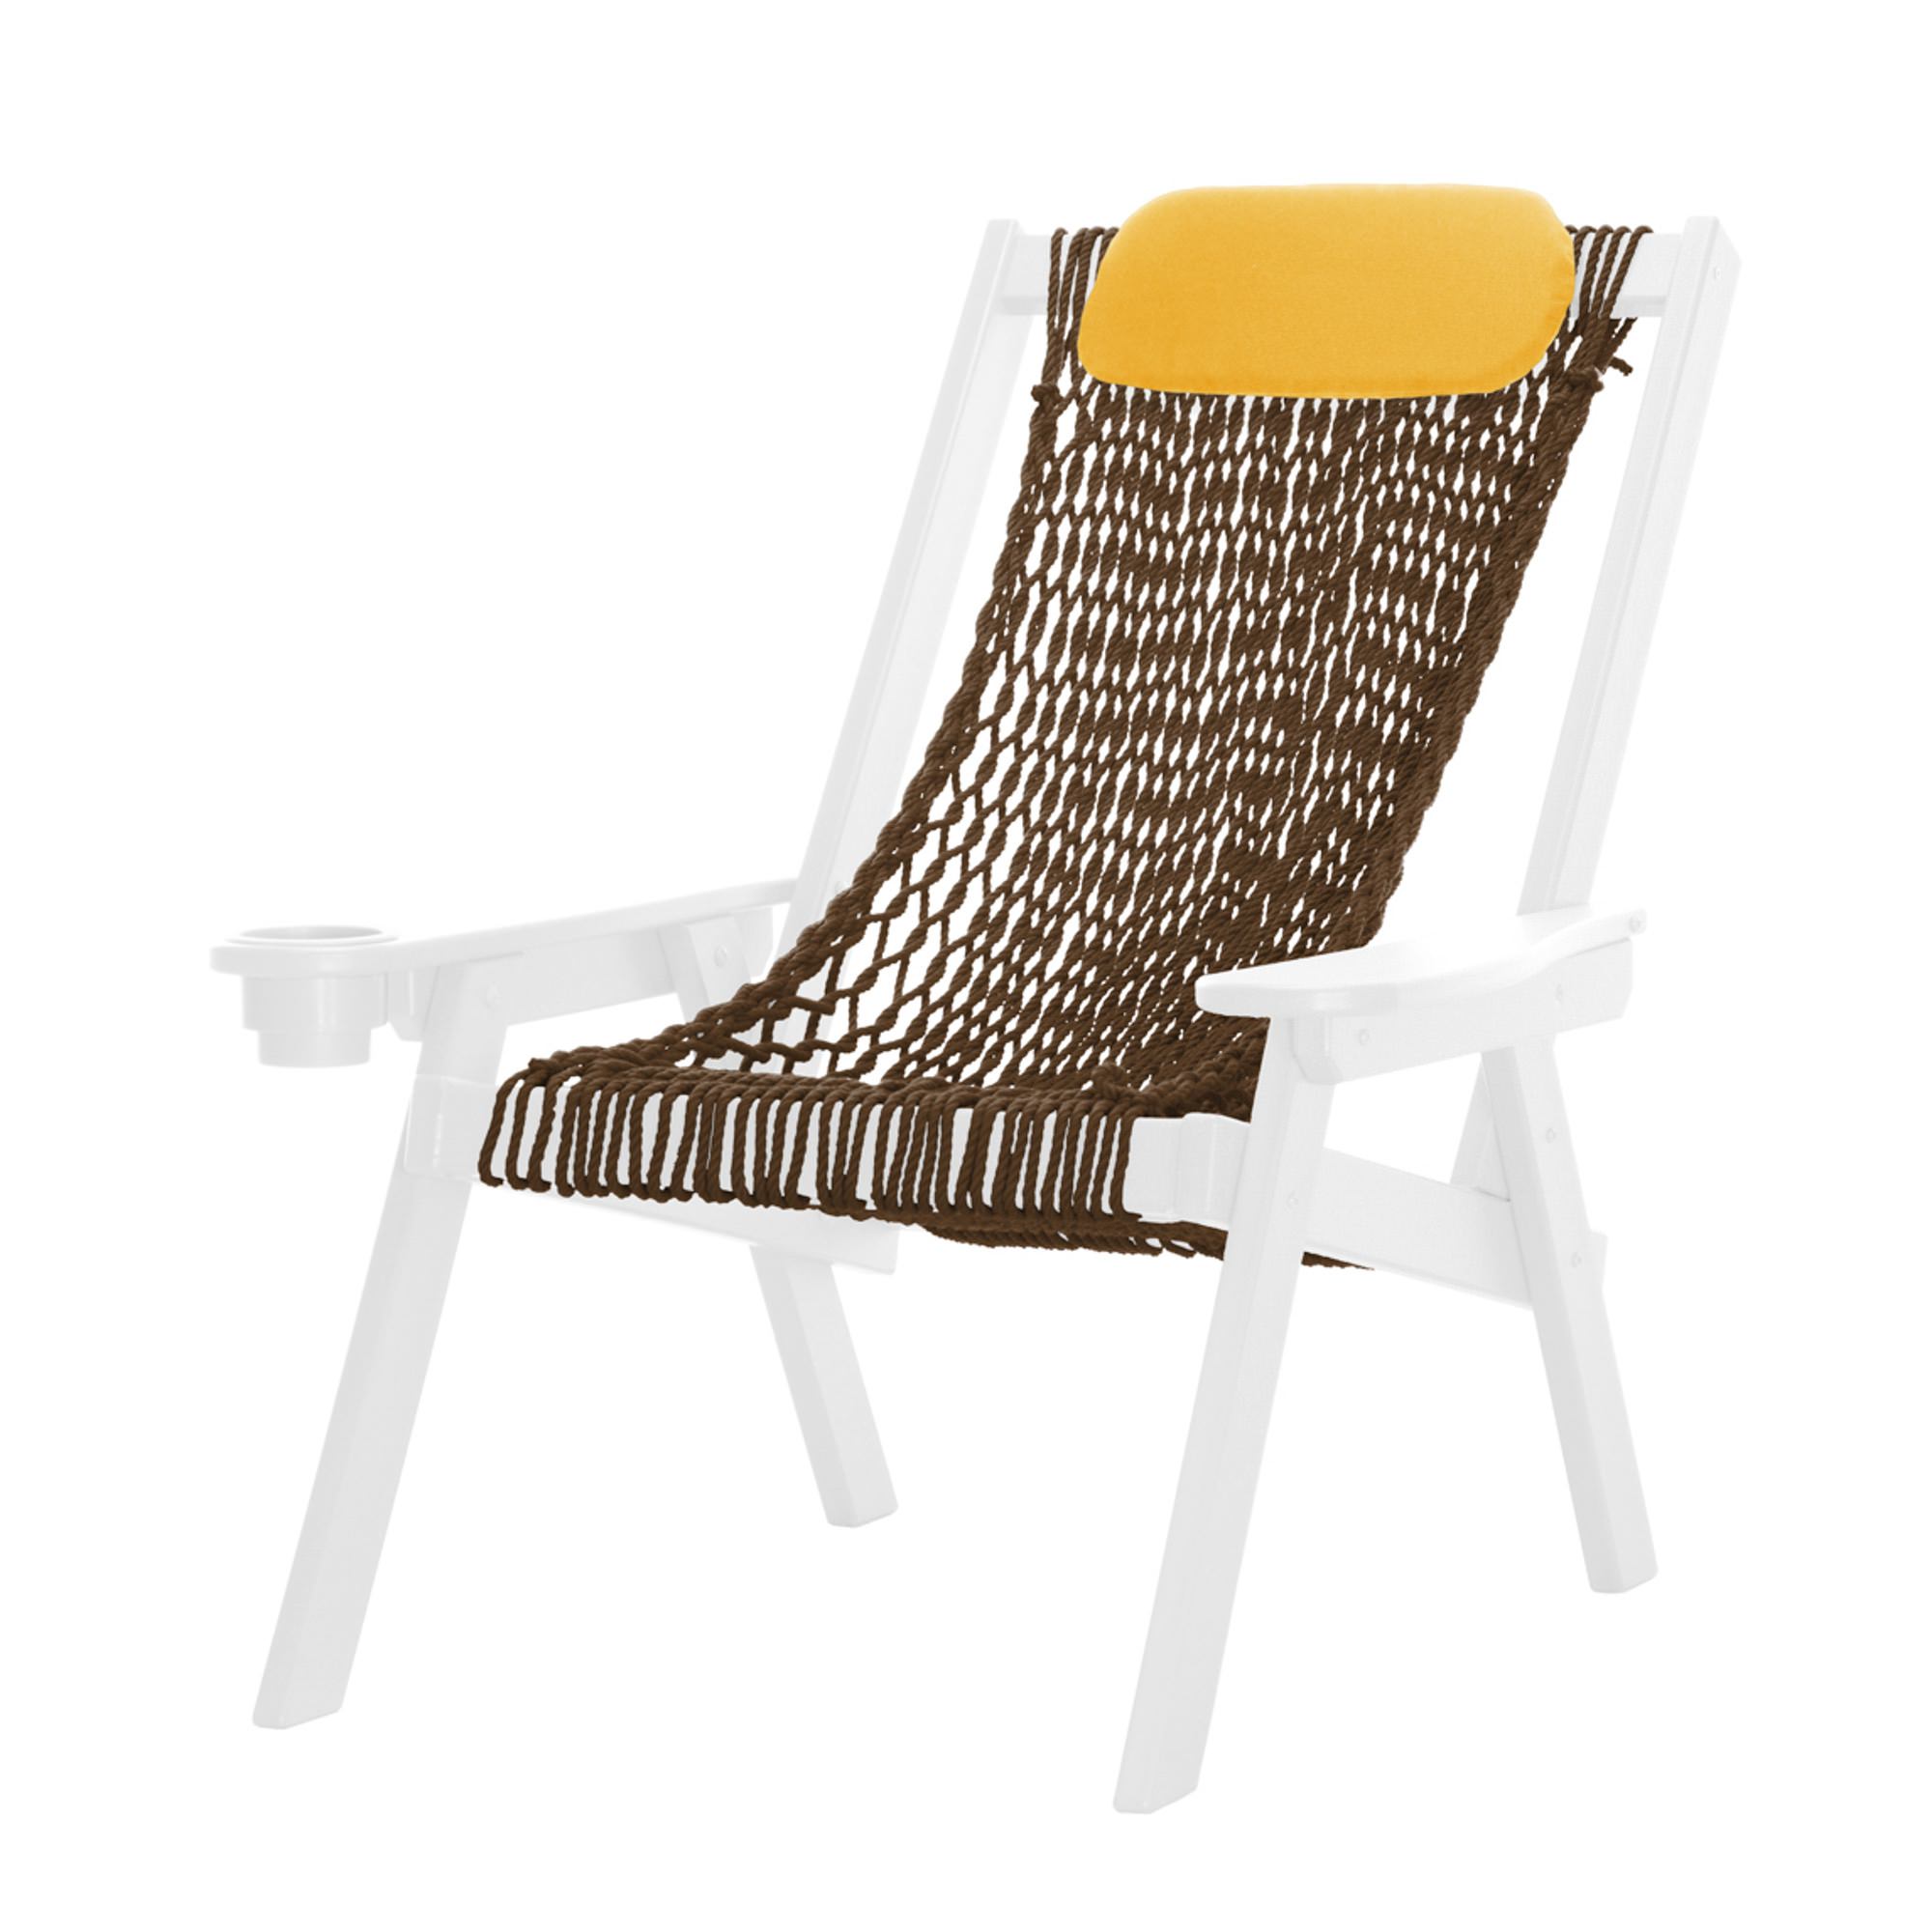 rope and chair